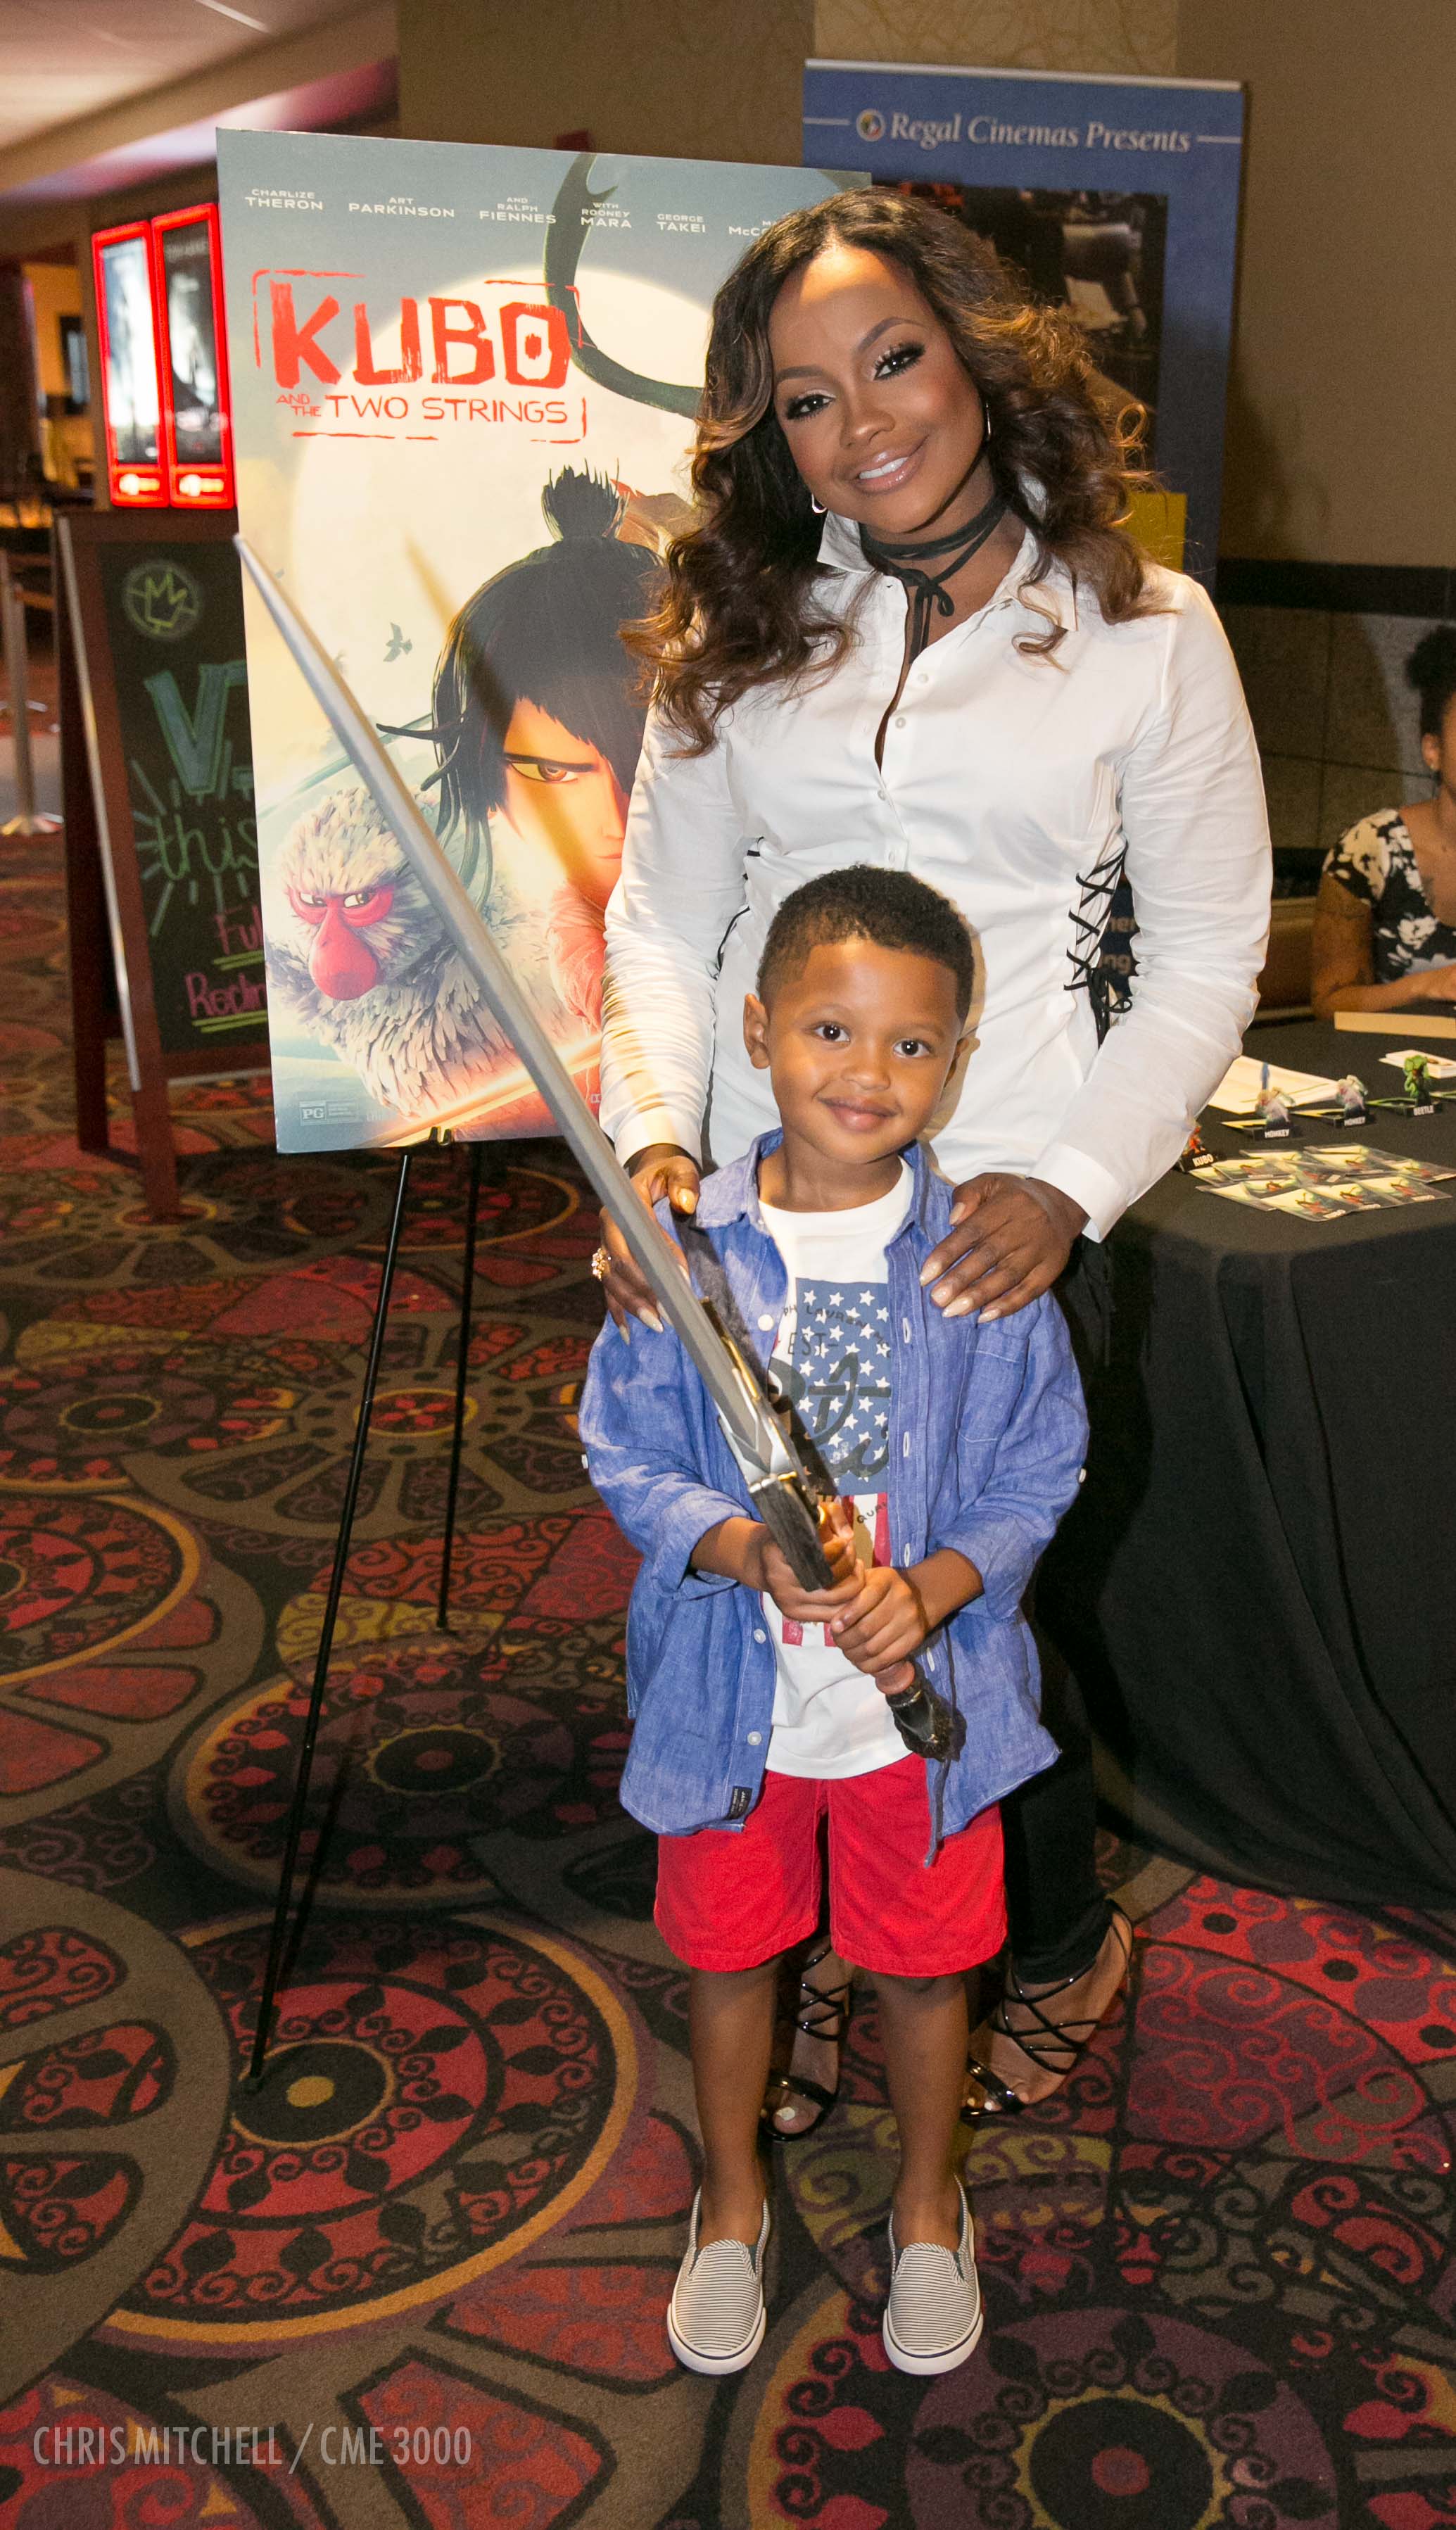 Phaedra Parks Has Kids Rushed to Safety After Being Told a Man Made a Bomb Threat Against Her